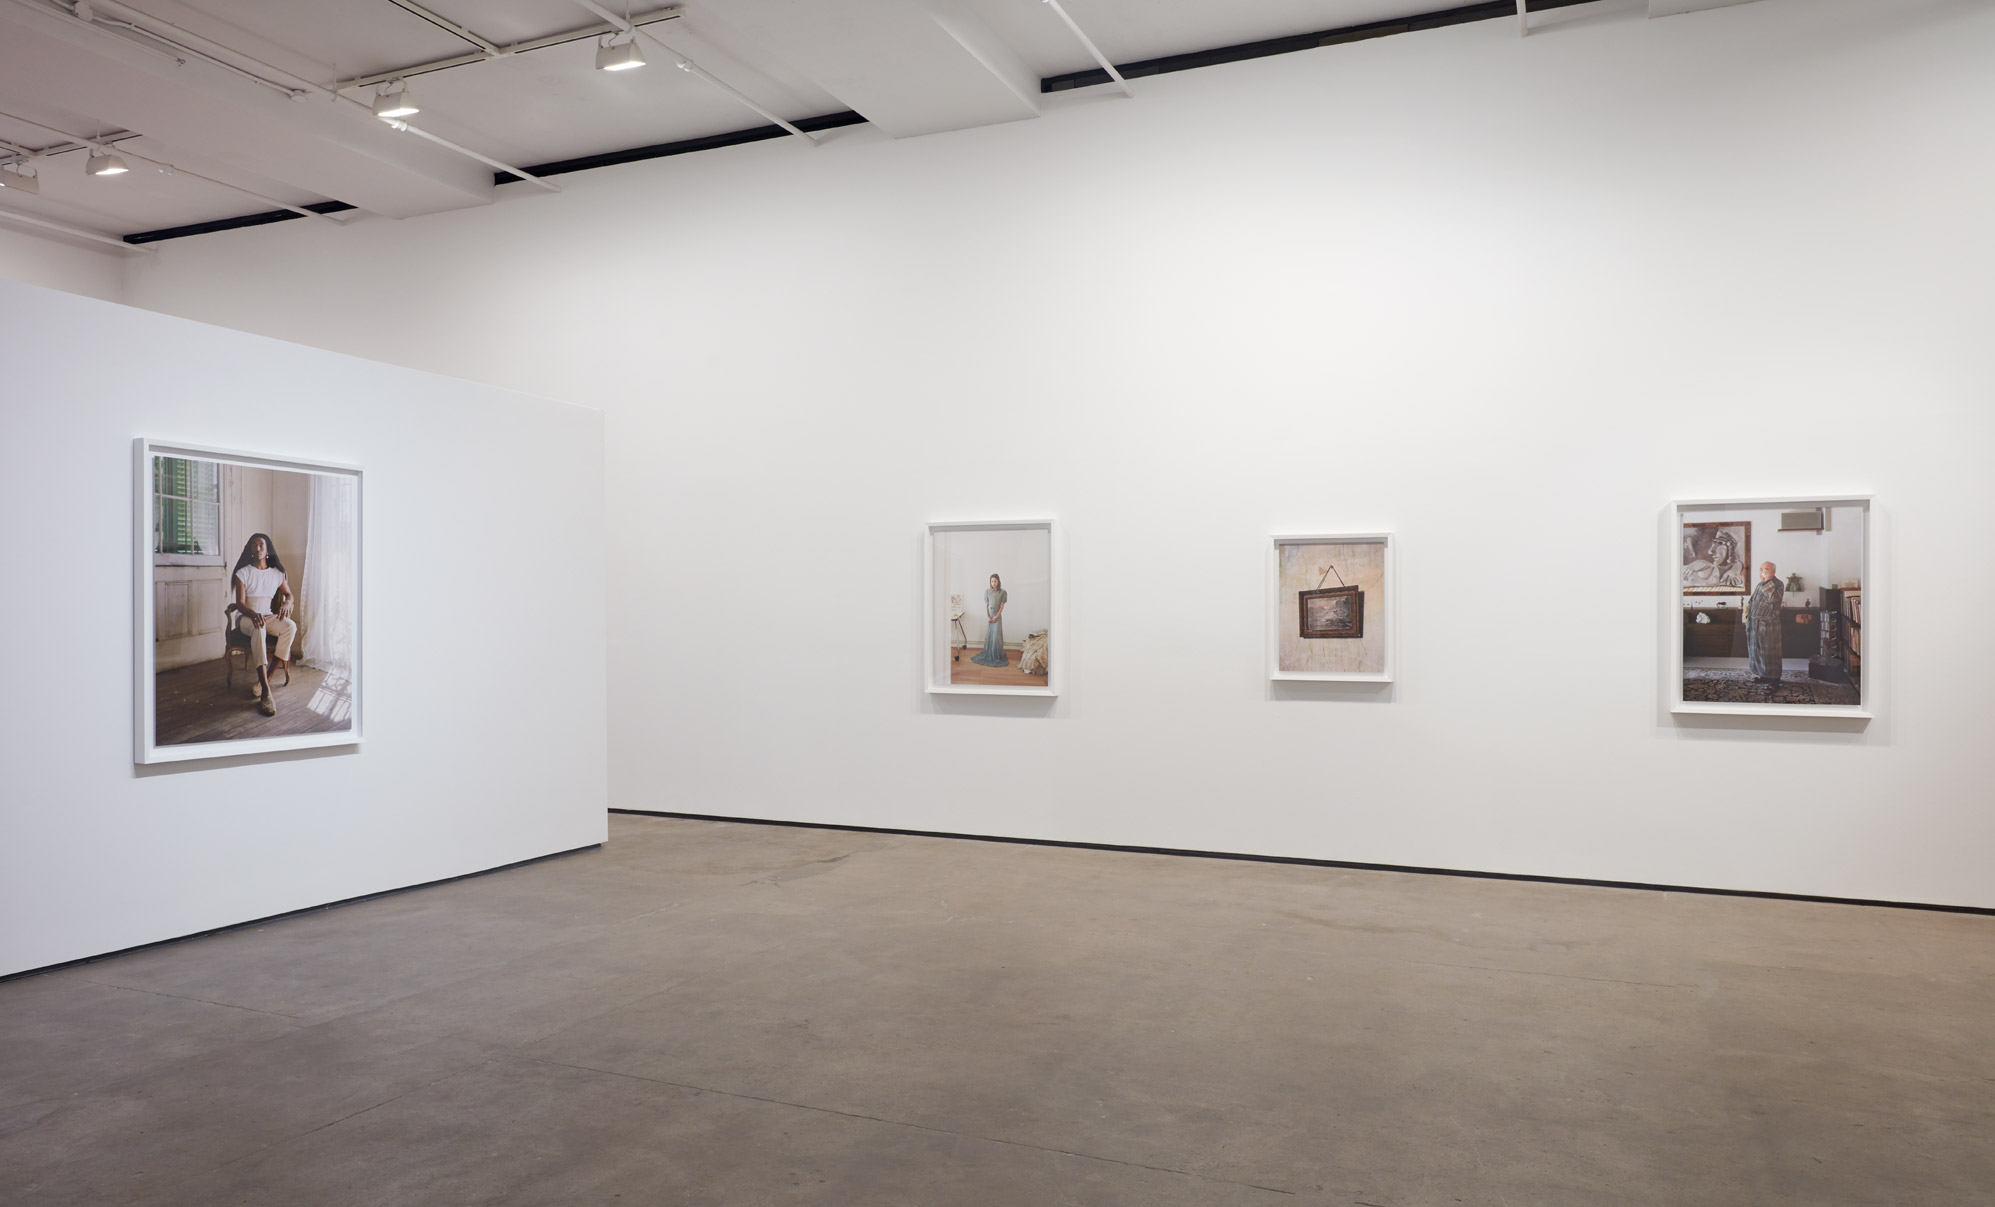 Installation view of Alec Soth: I Know How Furiously Your Heart Is Beating at Sean Kelly, New York March 21 - April 27, 2019 Photography: Jason Wyche, New York Courtesy: Sean Kelly, New York